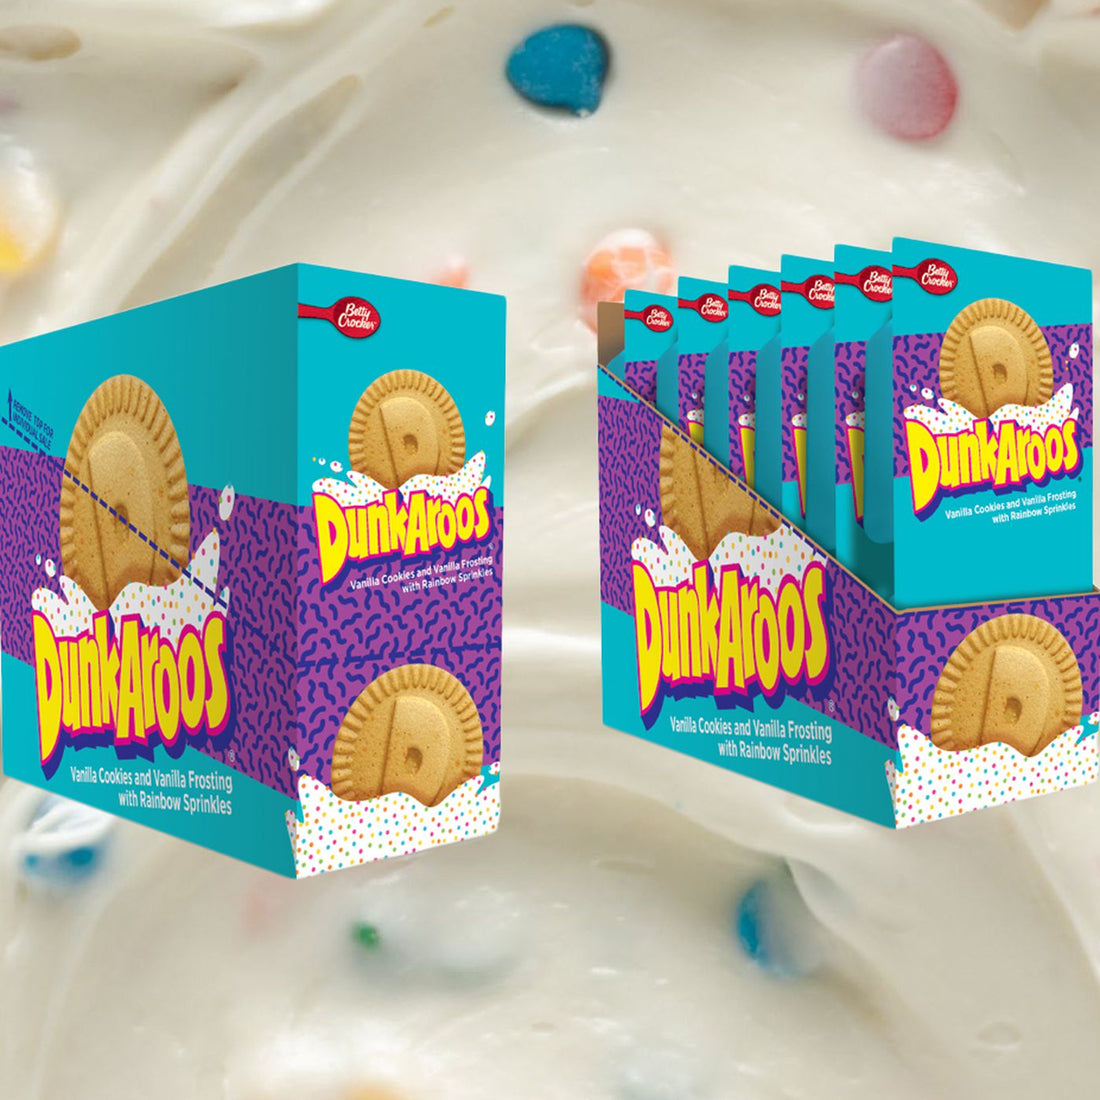 Dunkaroos are Returning and Bringing Back the Happy Days!